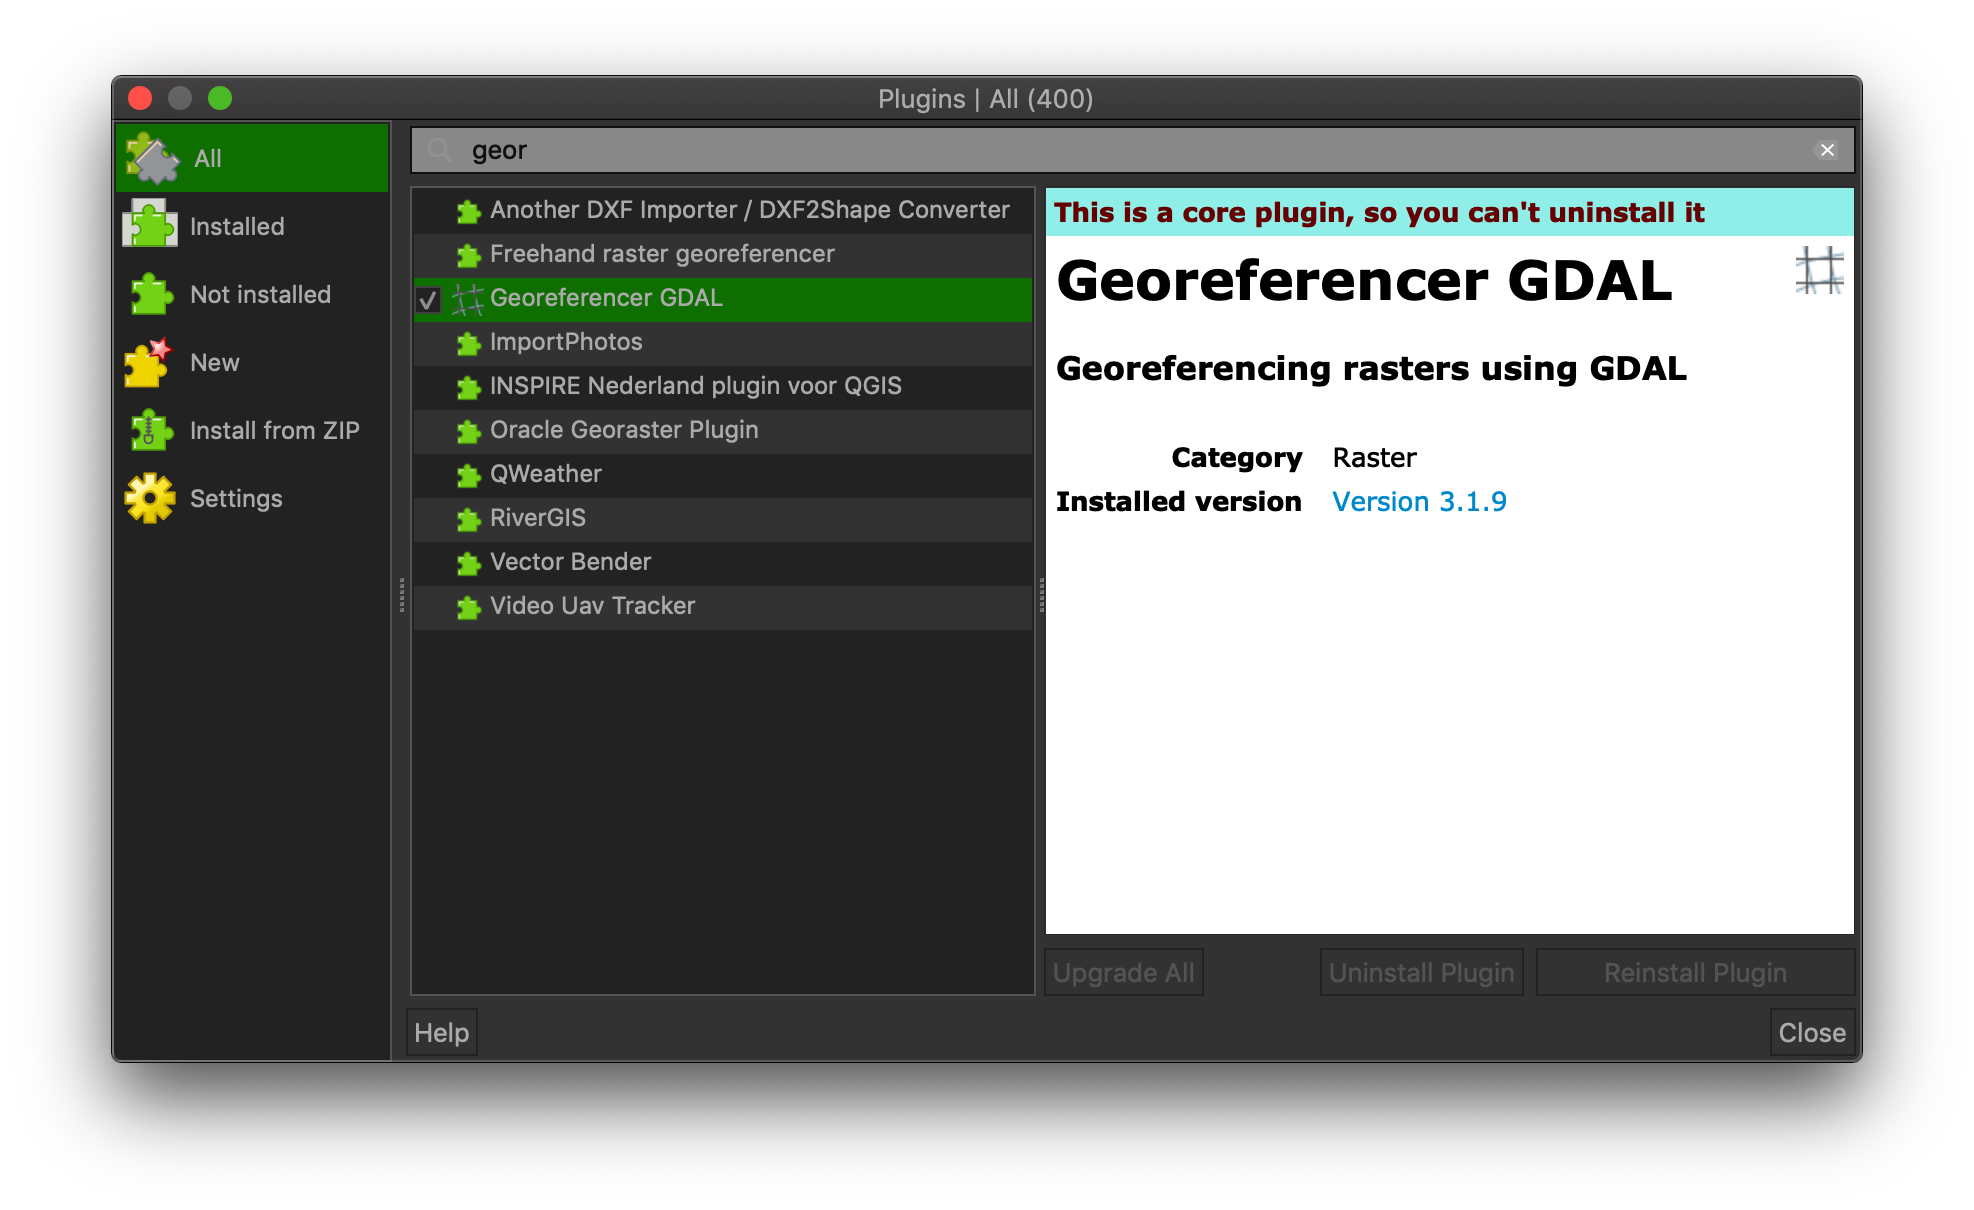 The Georeference plugin is already installed but needs to be enabled